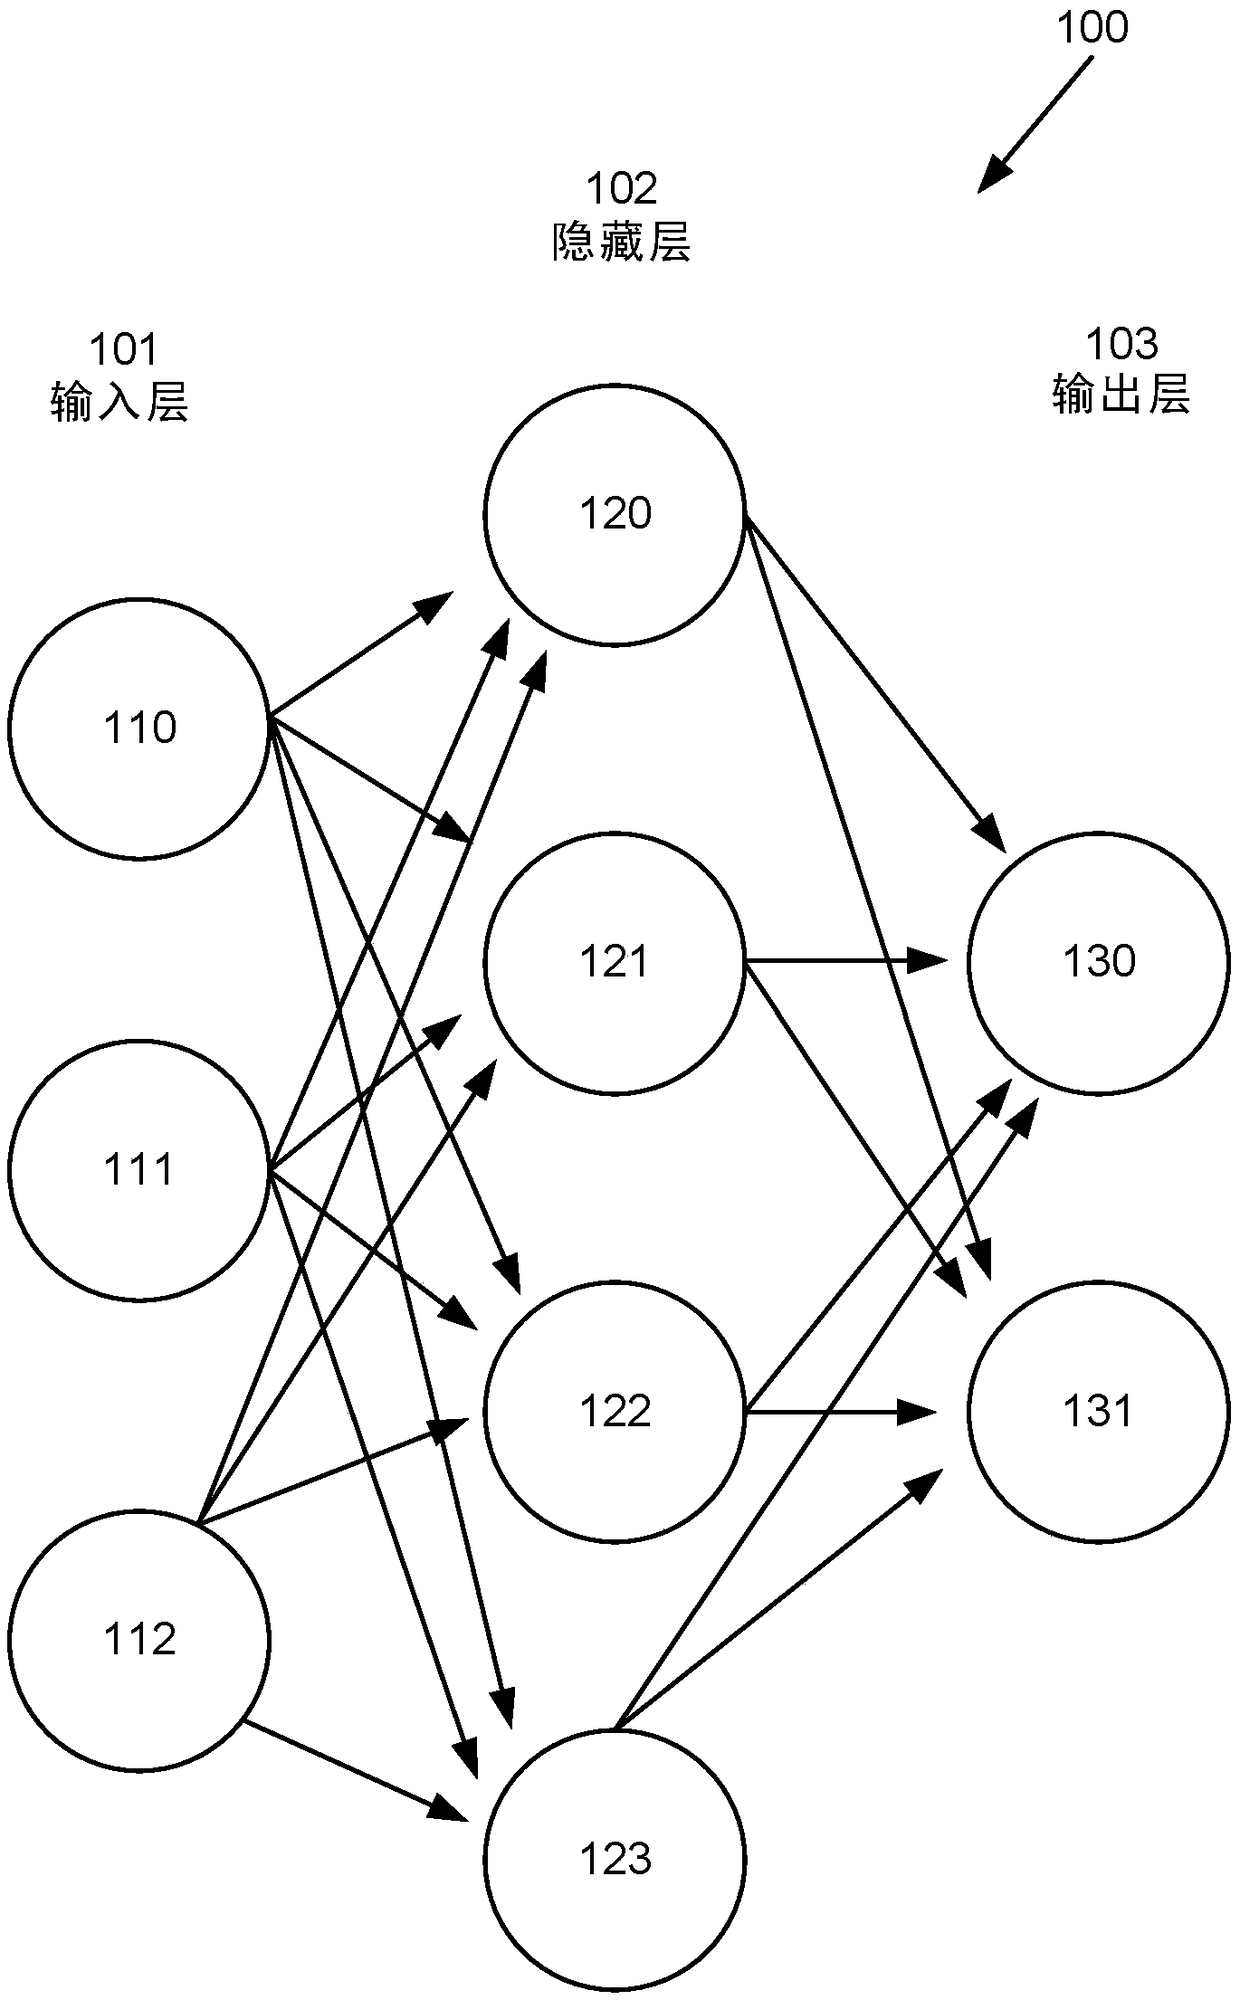 Artificial neural network with side input for language modelling and prediction